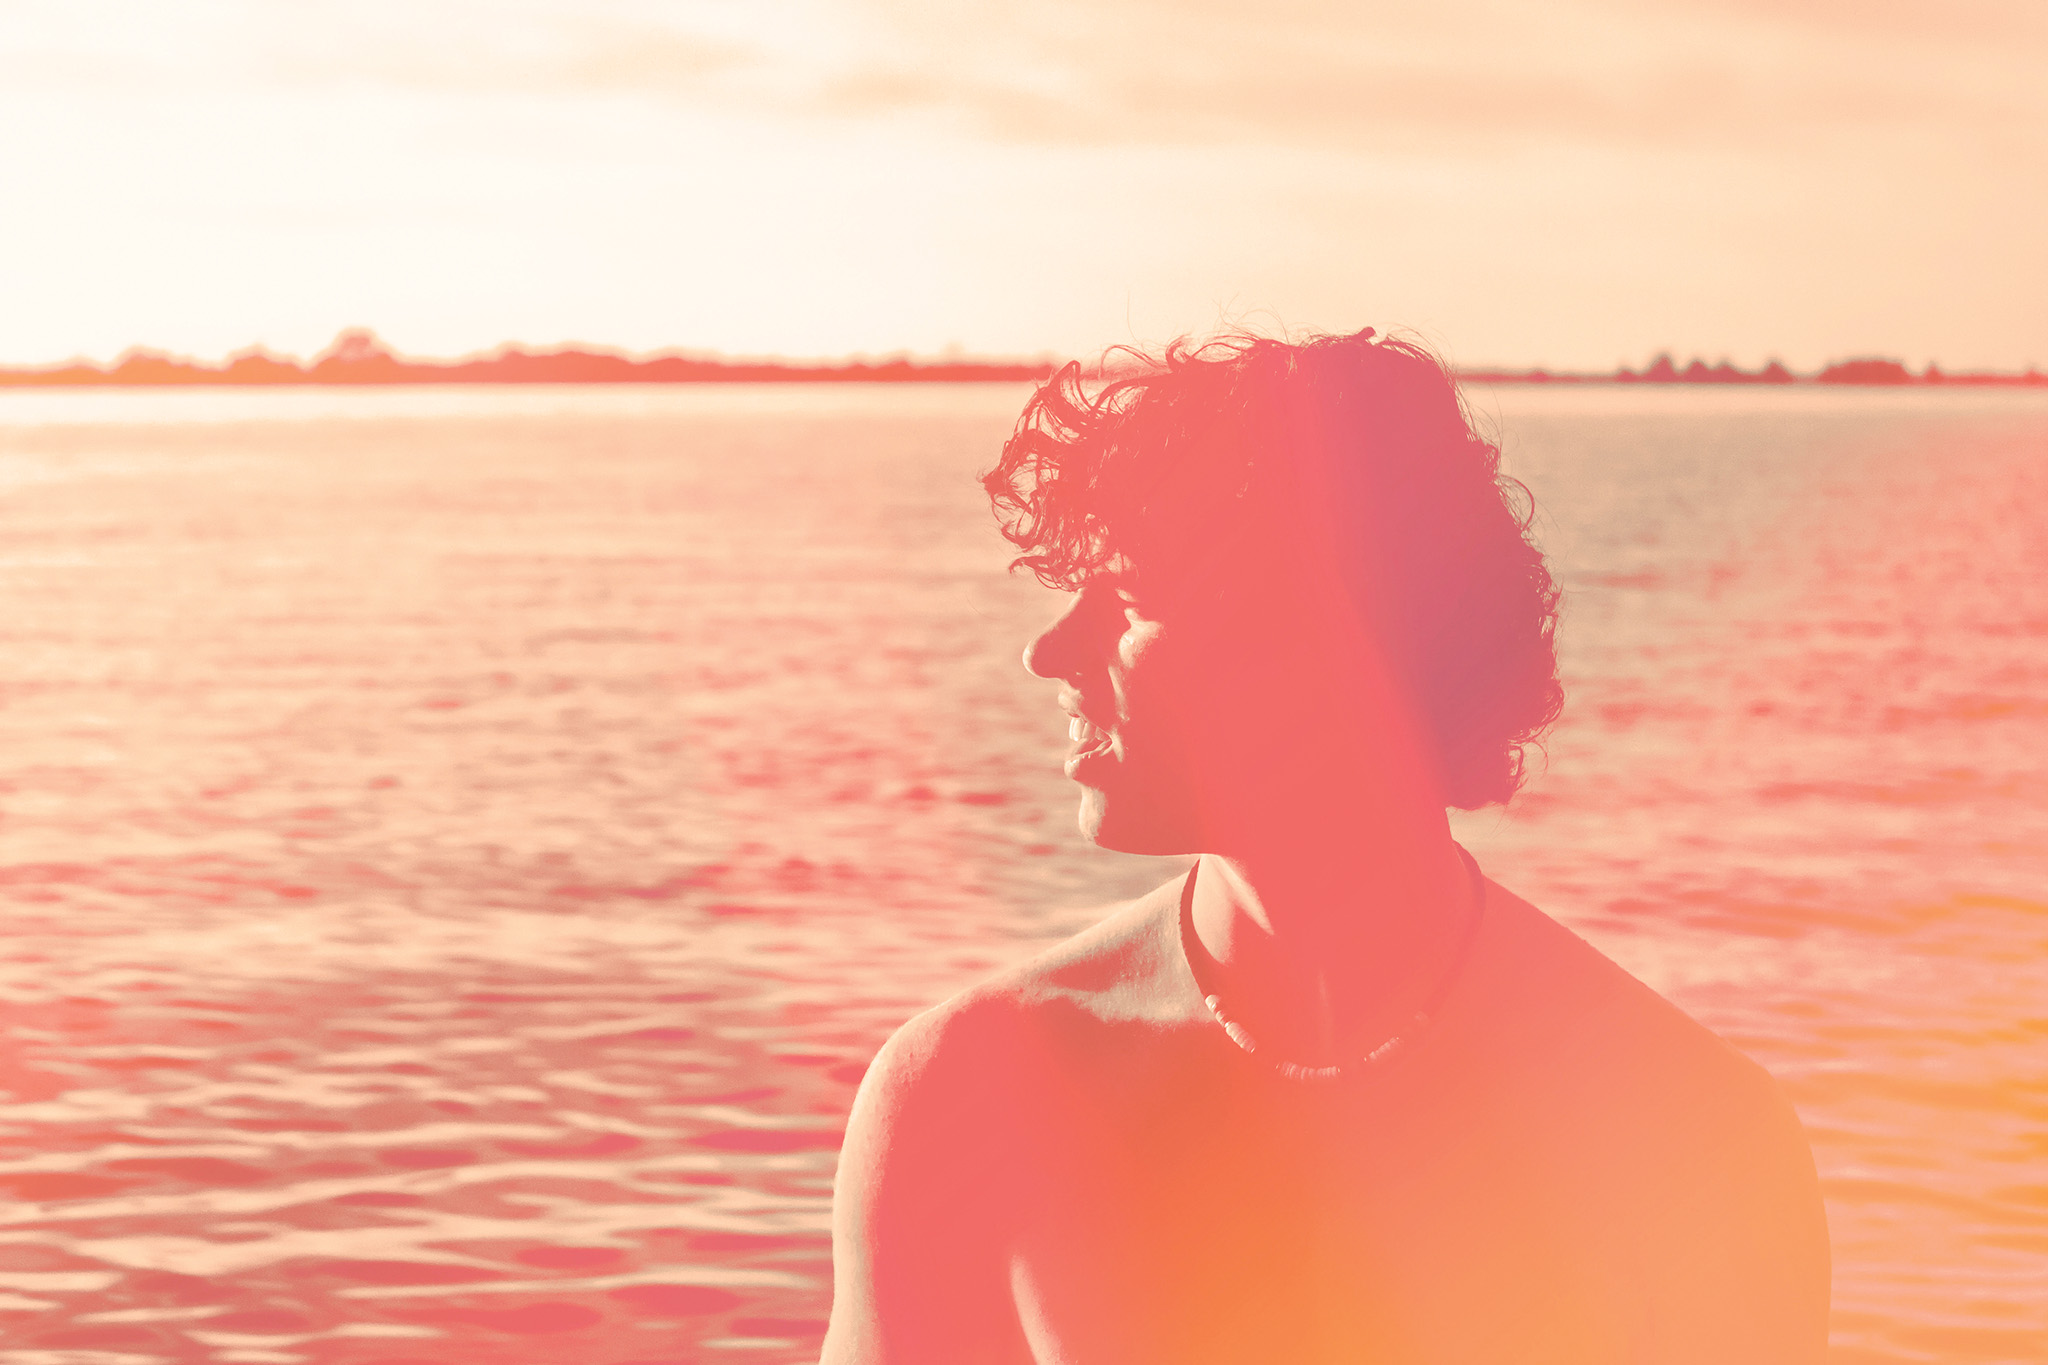 This acts as an example of an image after proper editing. It has had it's colours heavily edited to be made up of pinks, peaches and oranges. It depicts a teen at a lake with sun shining on him.